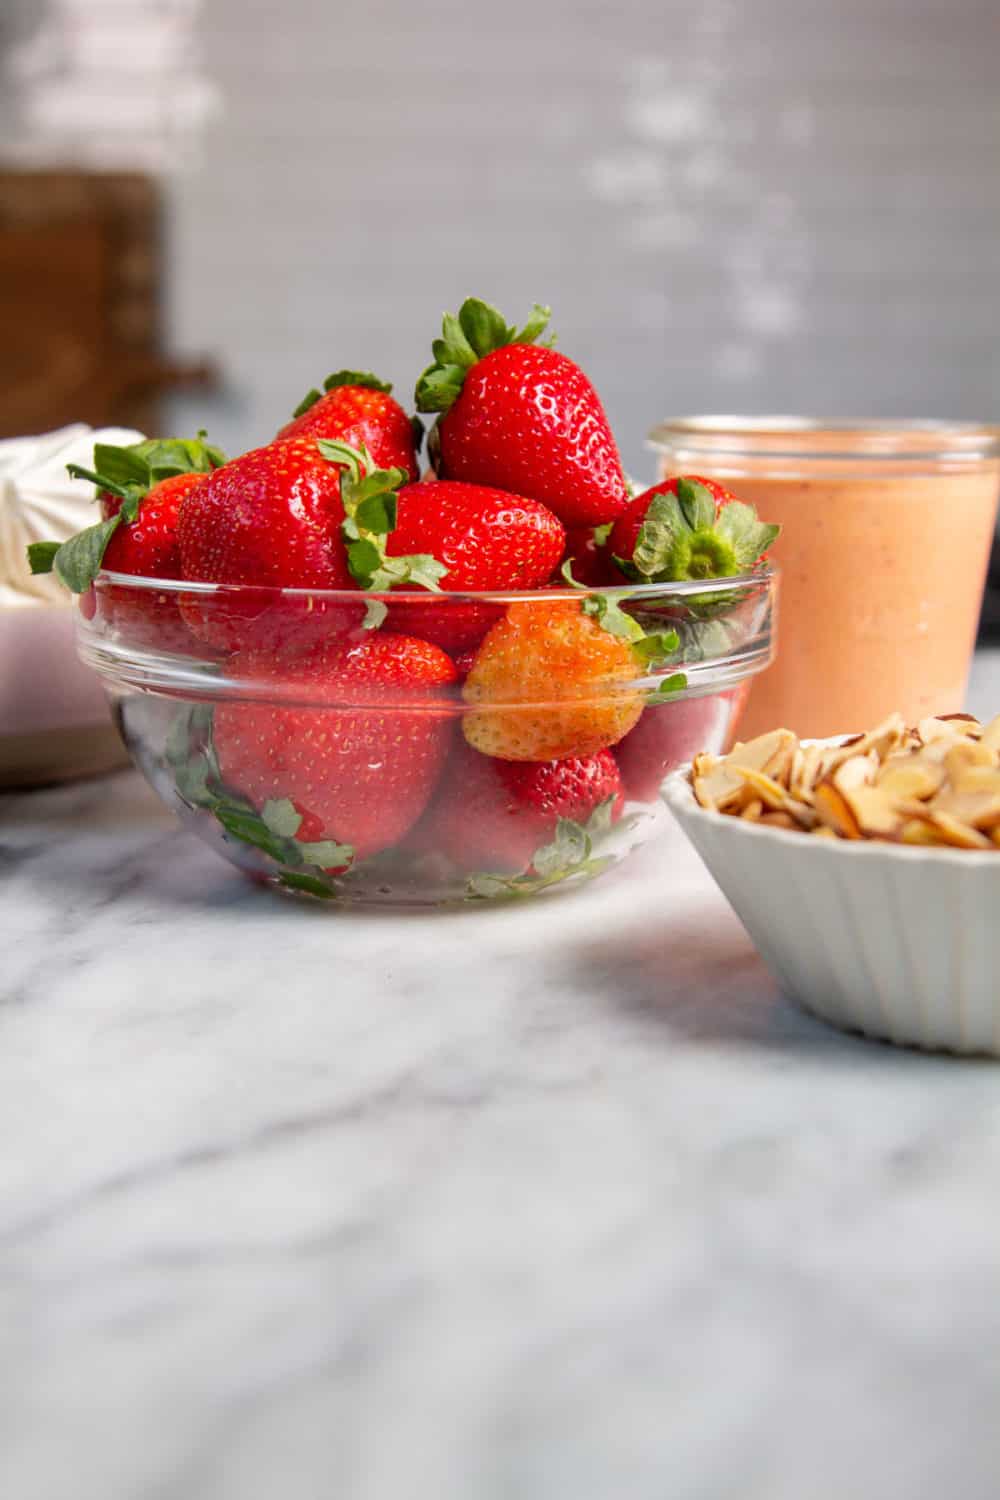 A bowl of strawberries next to a bowl of strawberry curd.